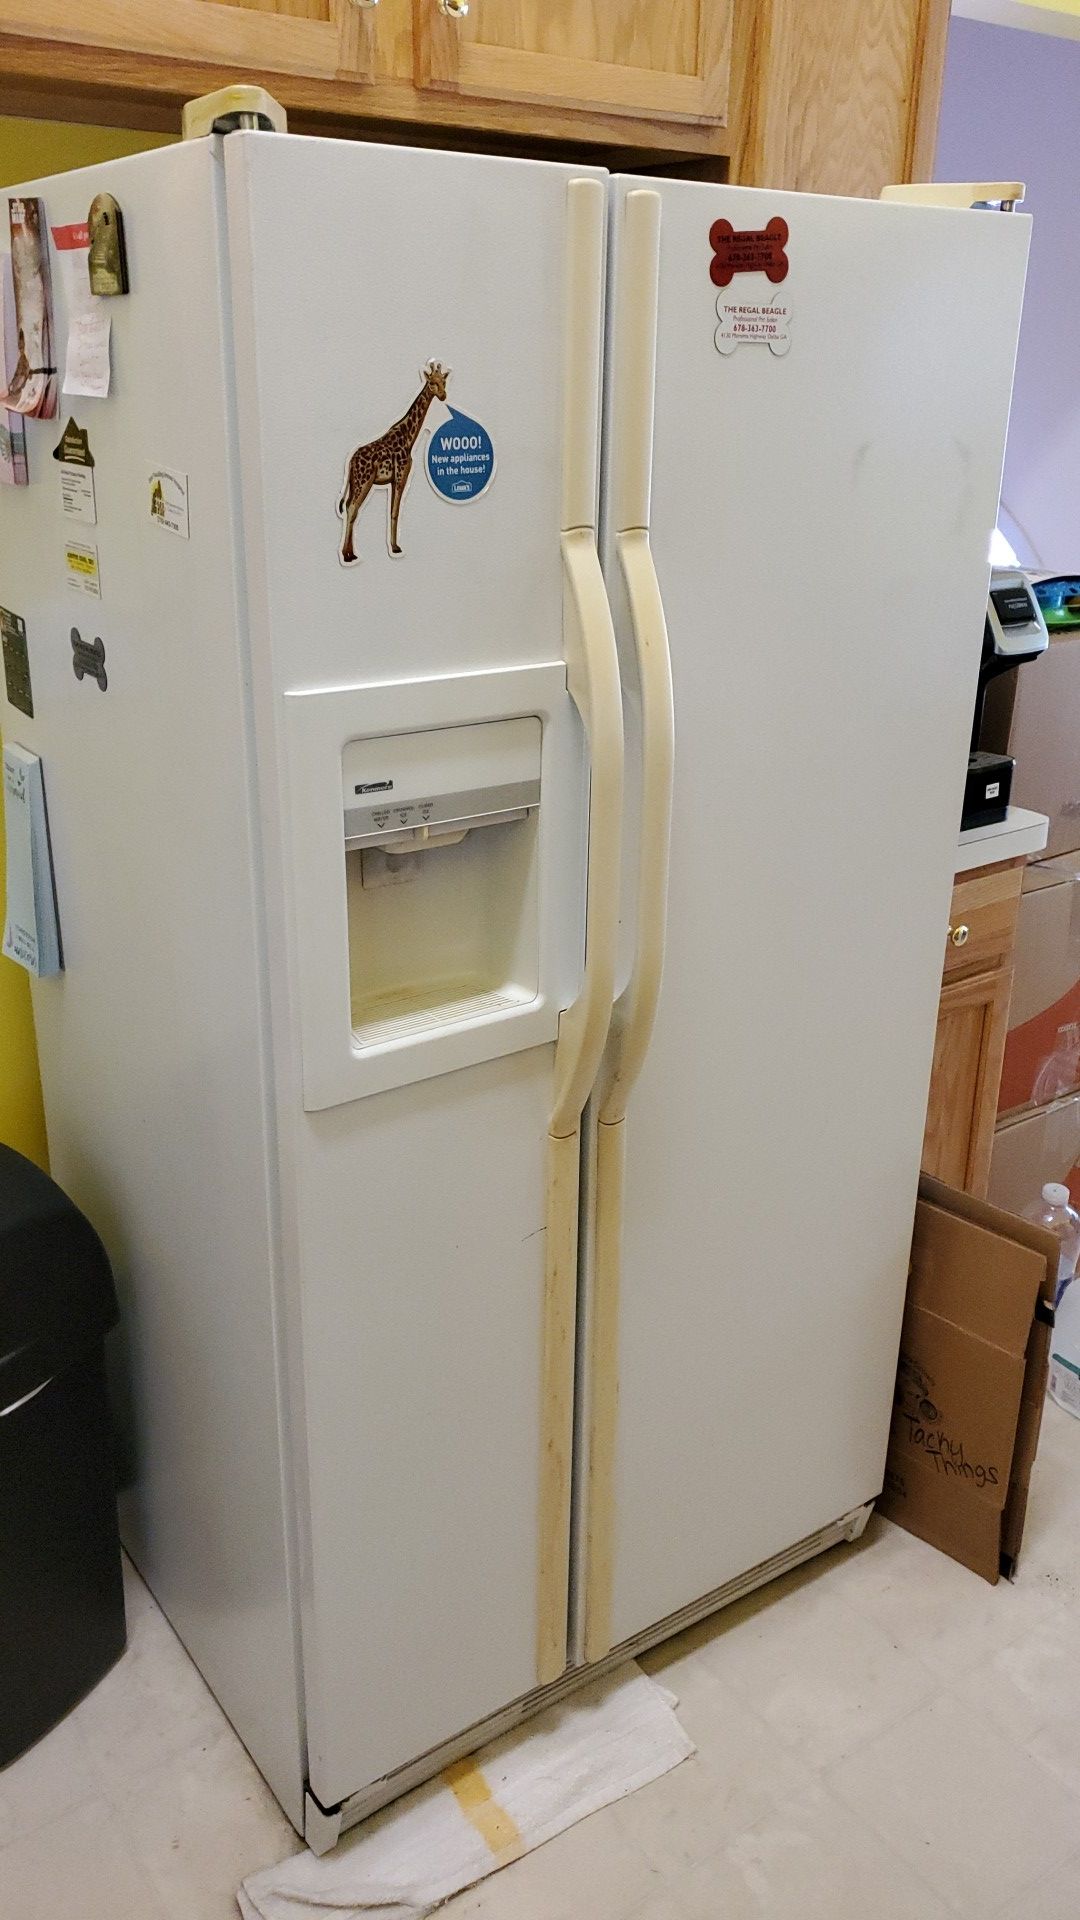 Kenmore Double Door Refrigerator - FREE / You must be able to load and pick up item.